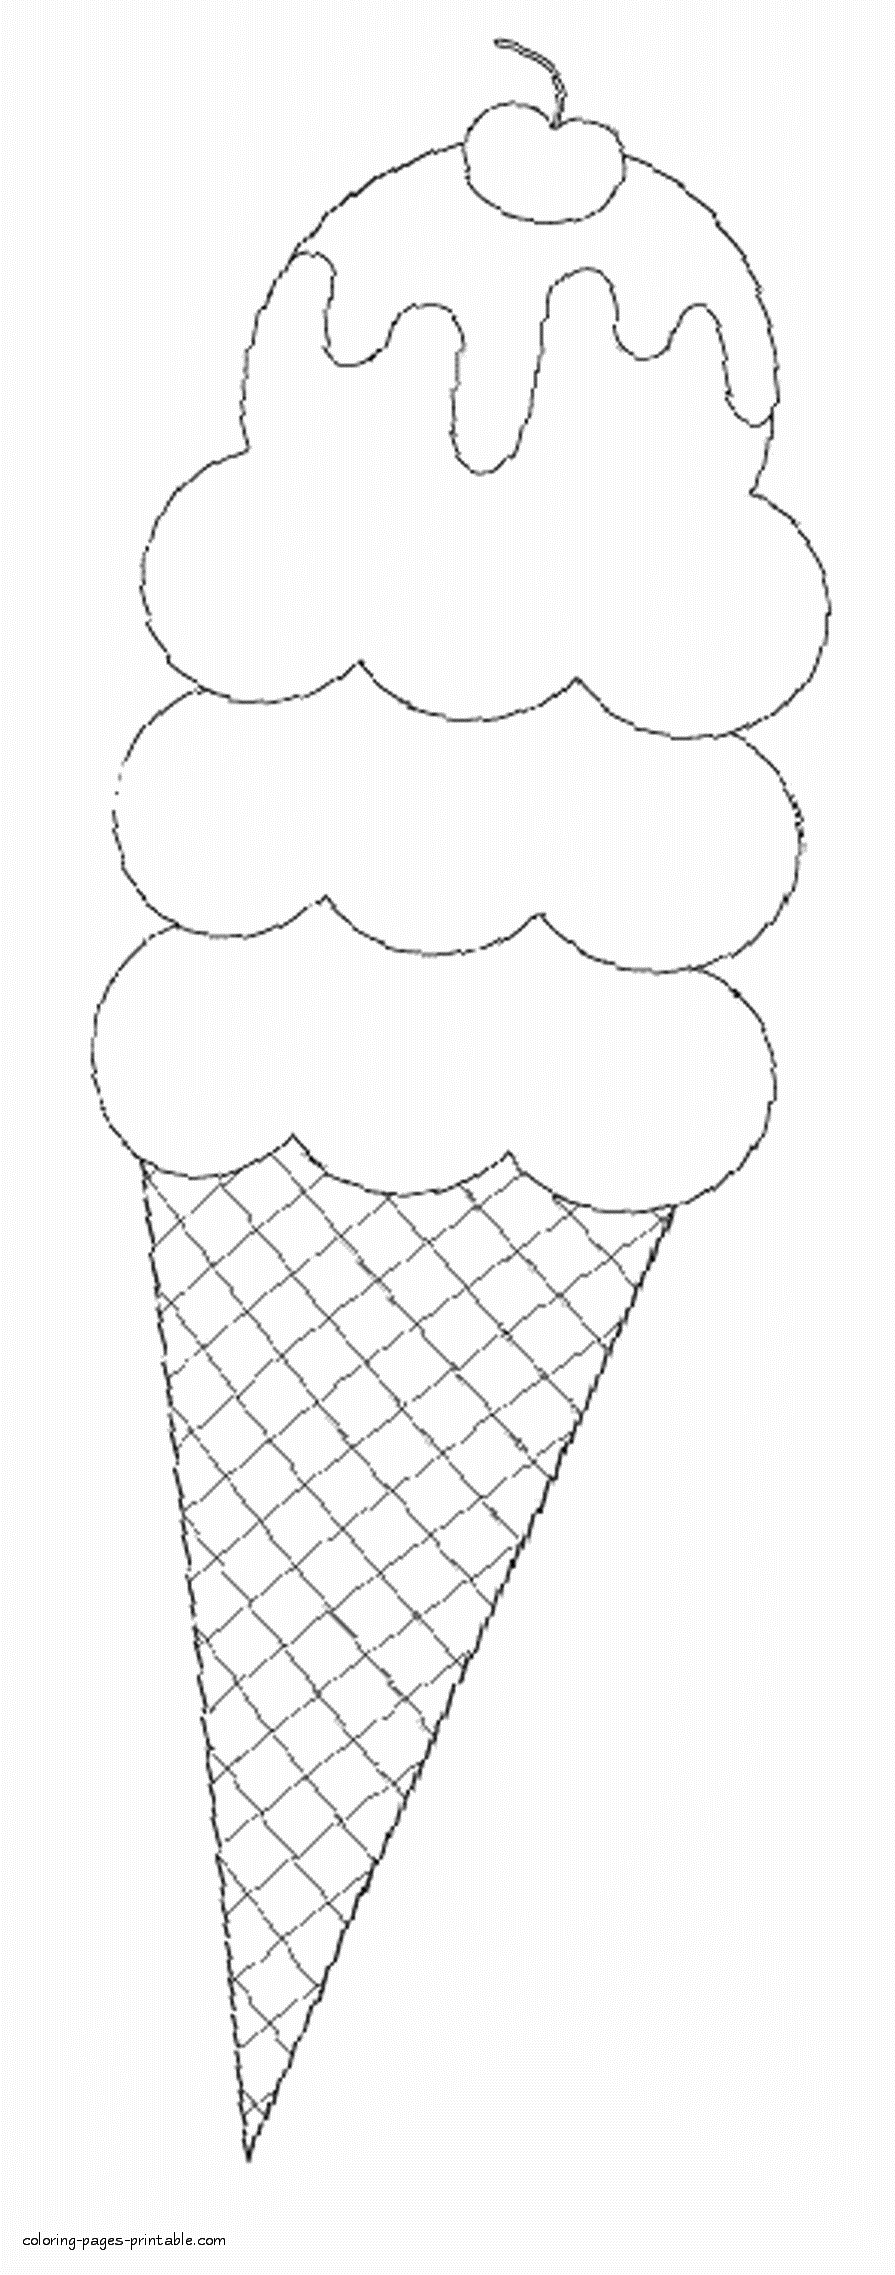 The ice cream cone with a cherry coloring page || COLORING-PAGES